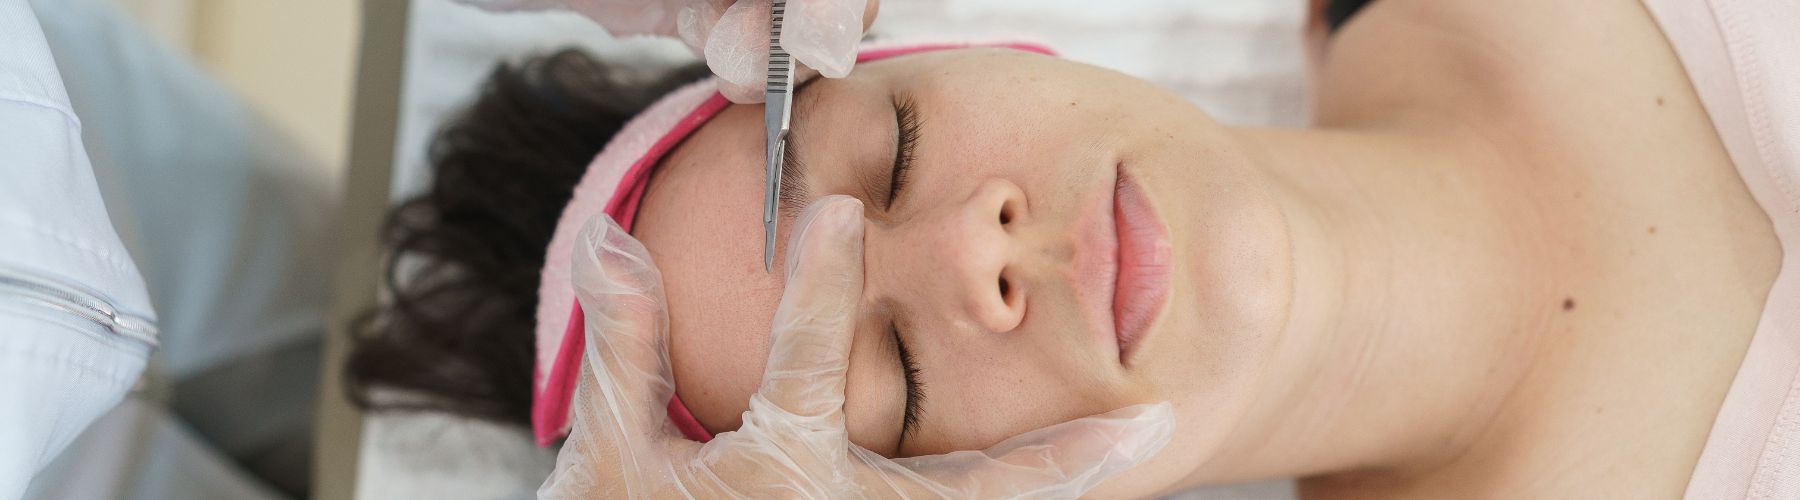 How Long Do the Effects of Dermaplaning Last?